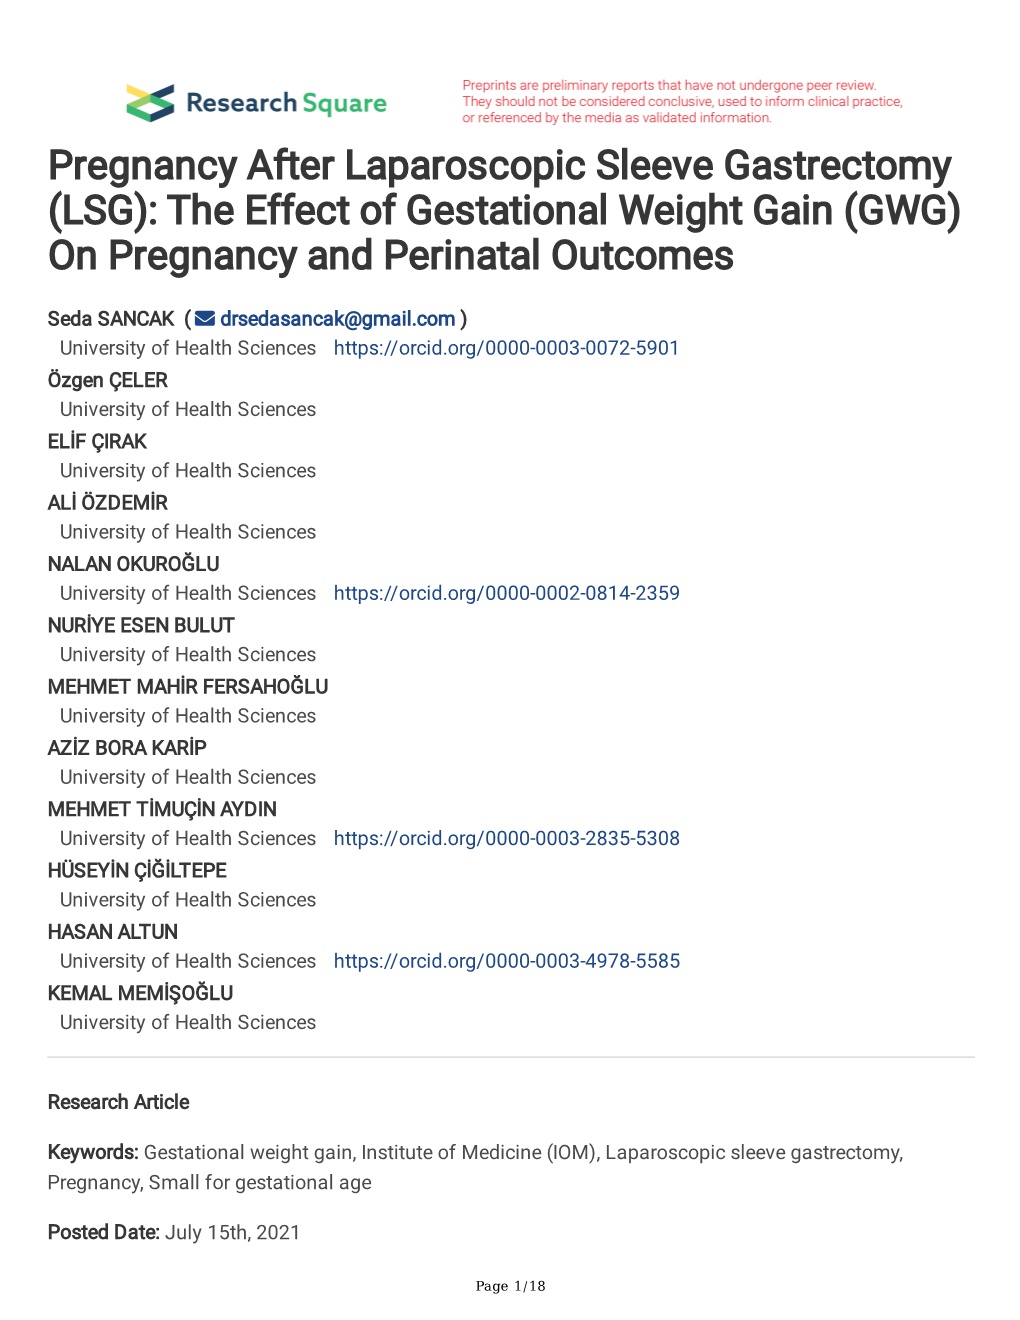 (LSG): the Effect of Gestational Weight Gain (GWG) on Pregnancy and Perinatal Outcomes